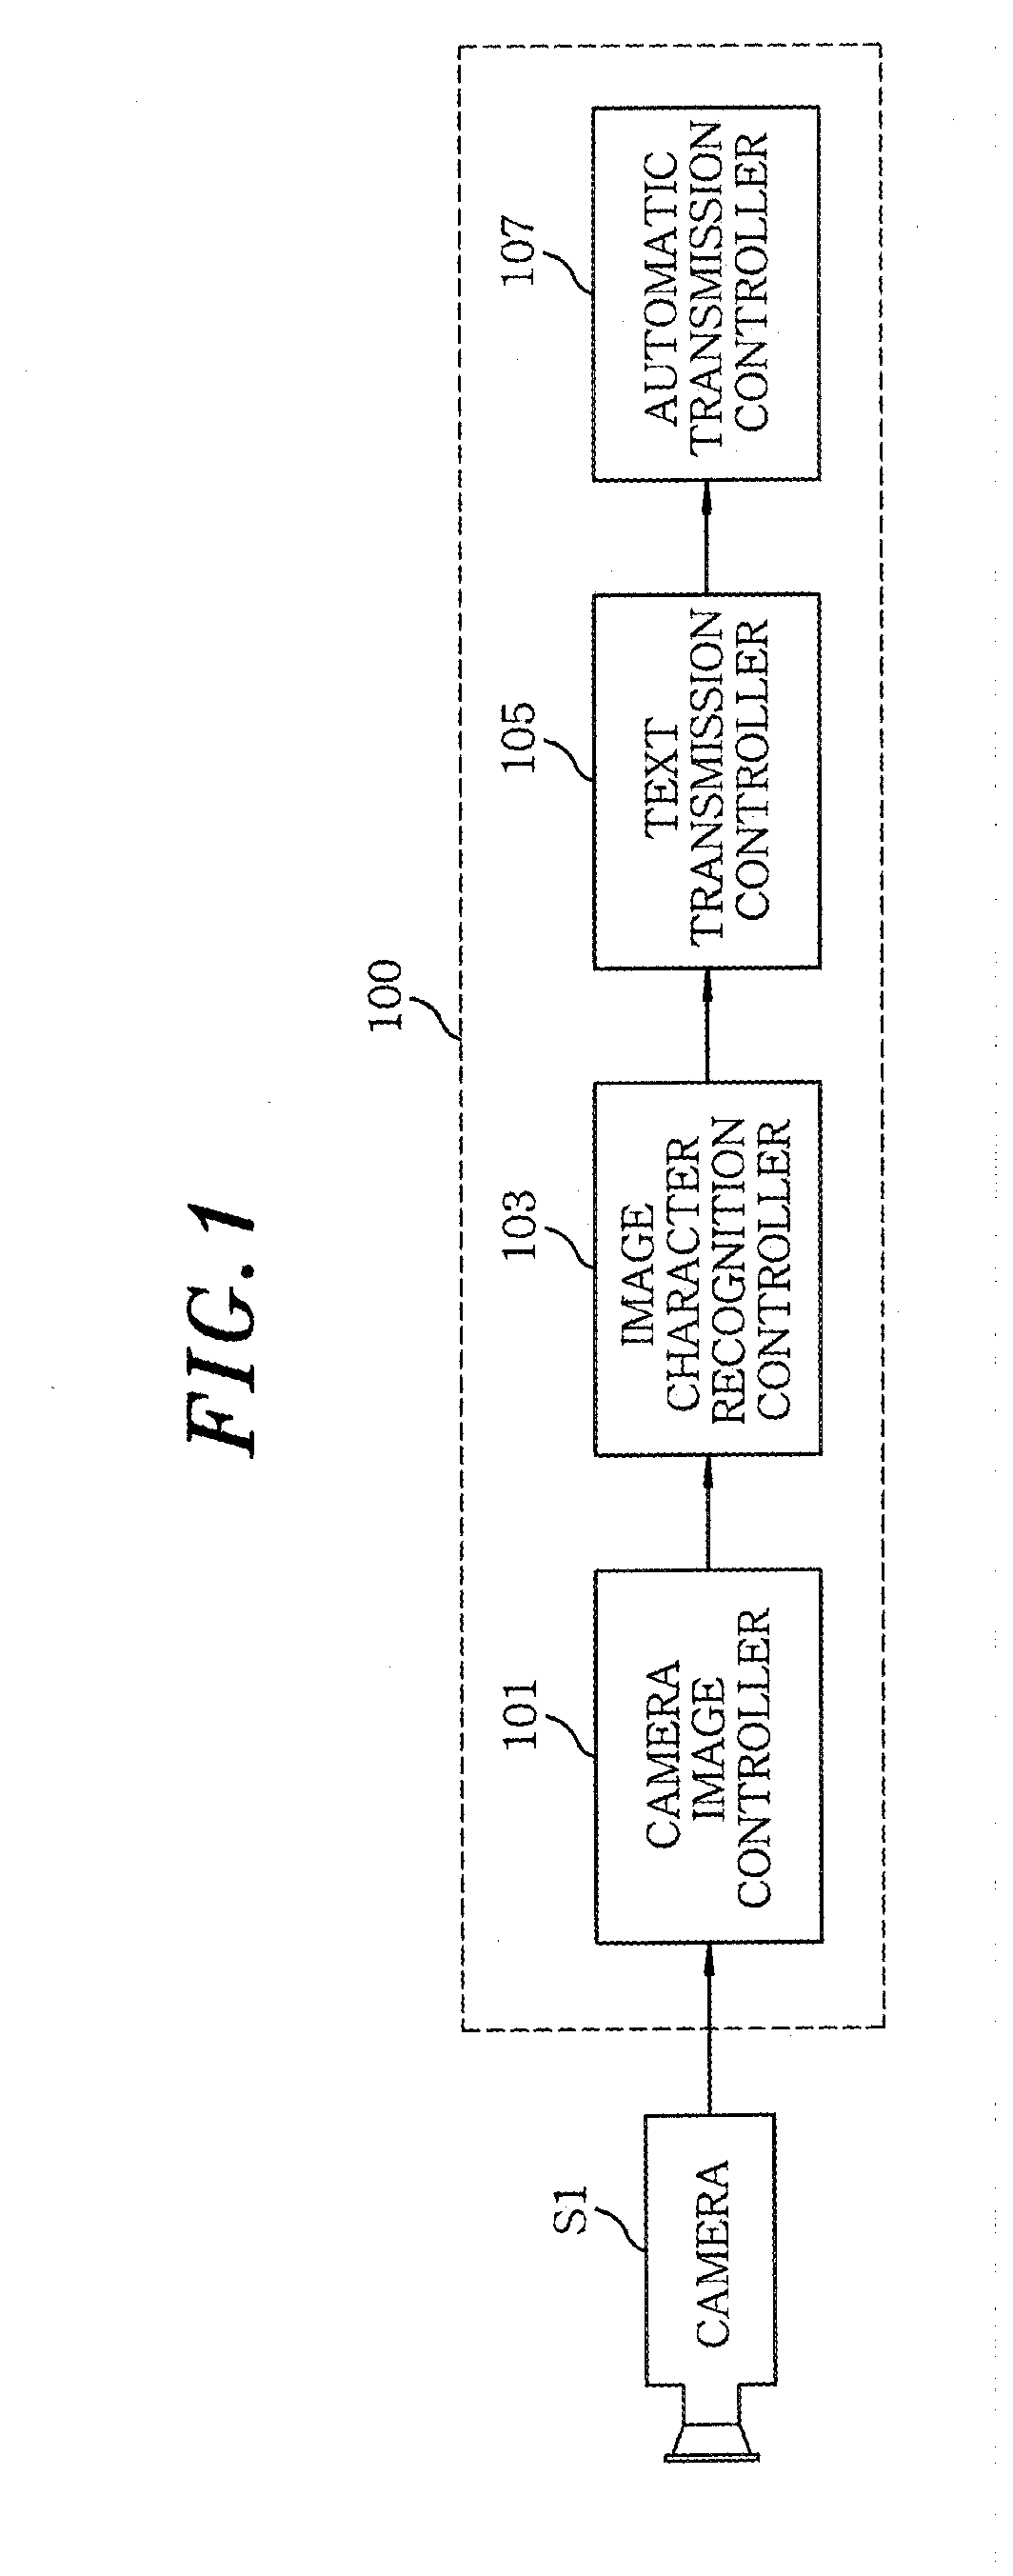 User-interactive automatic translation device and method for mobile device